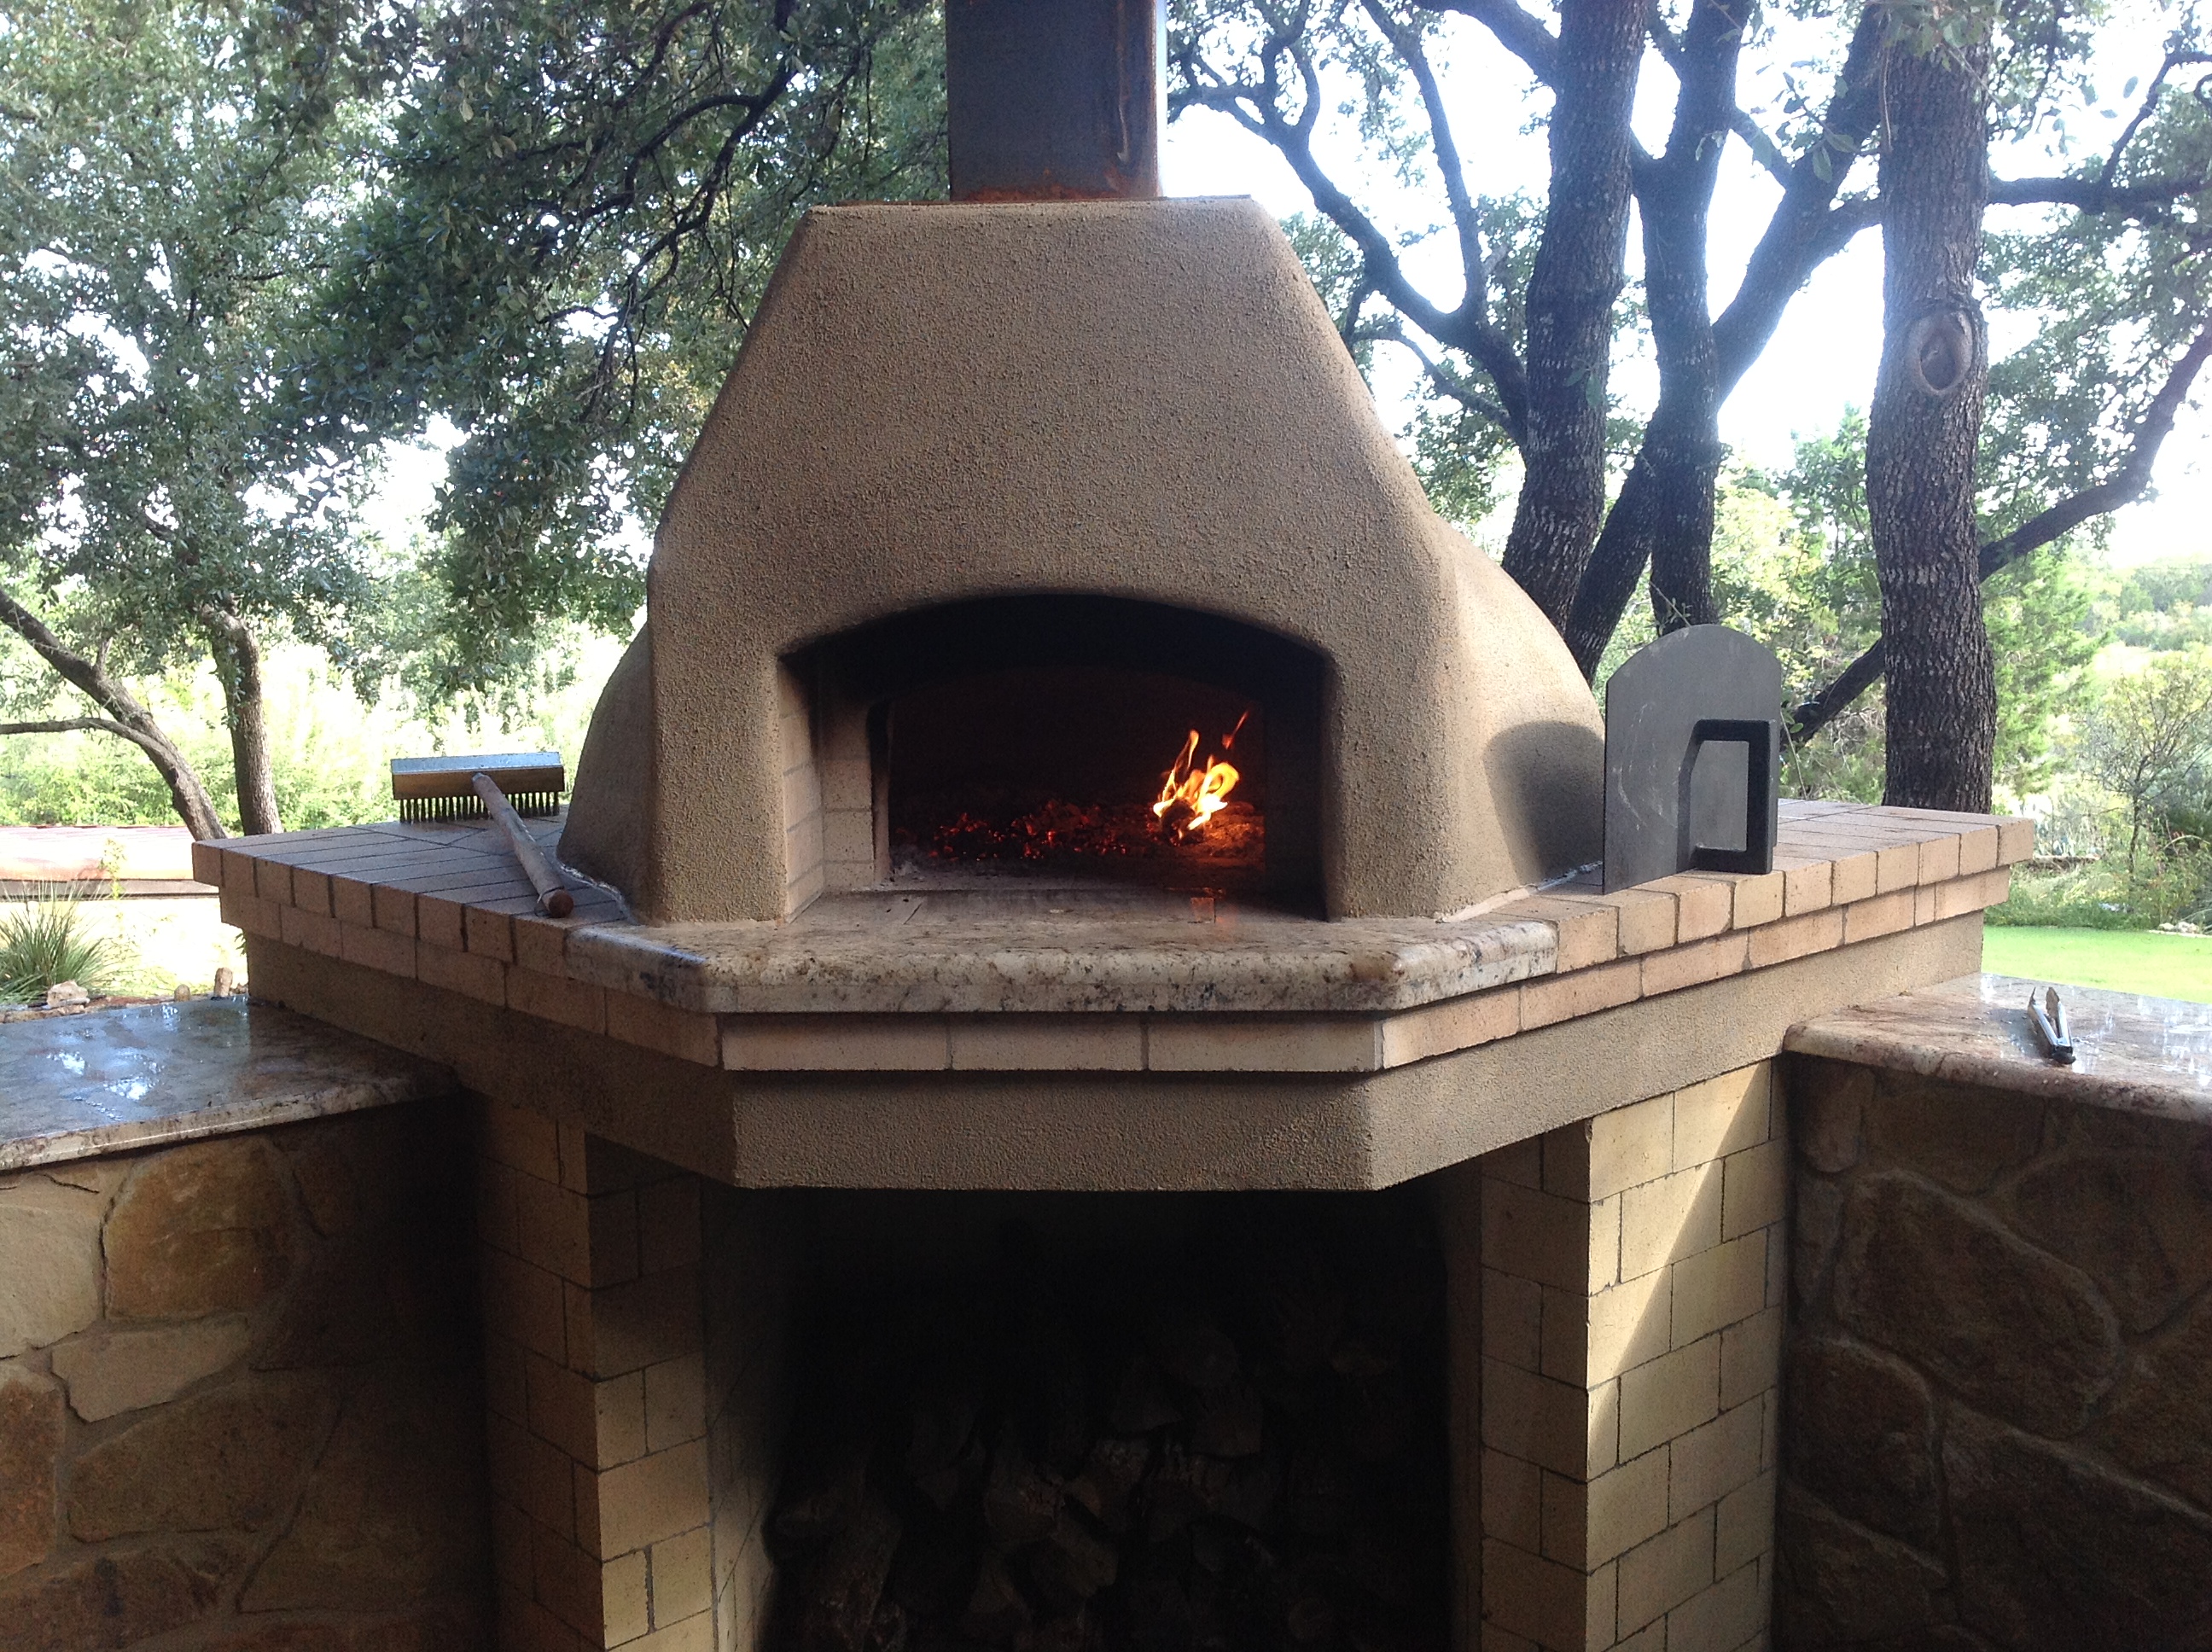 http://texasovenco.com/wp-content/uploads/2013/10/pizza-oven-curing-wood.jpg